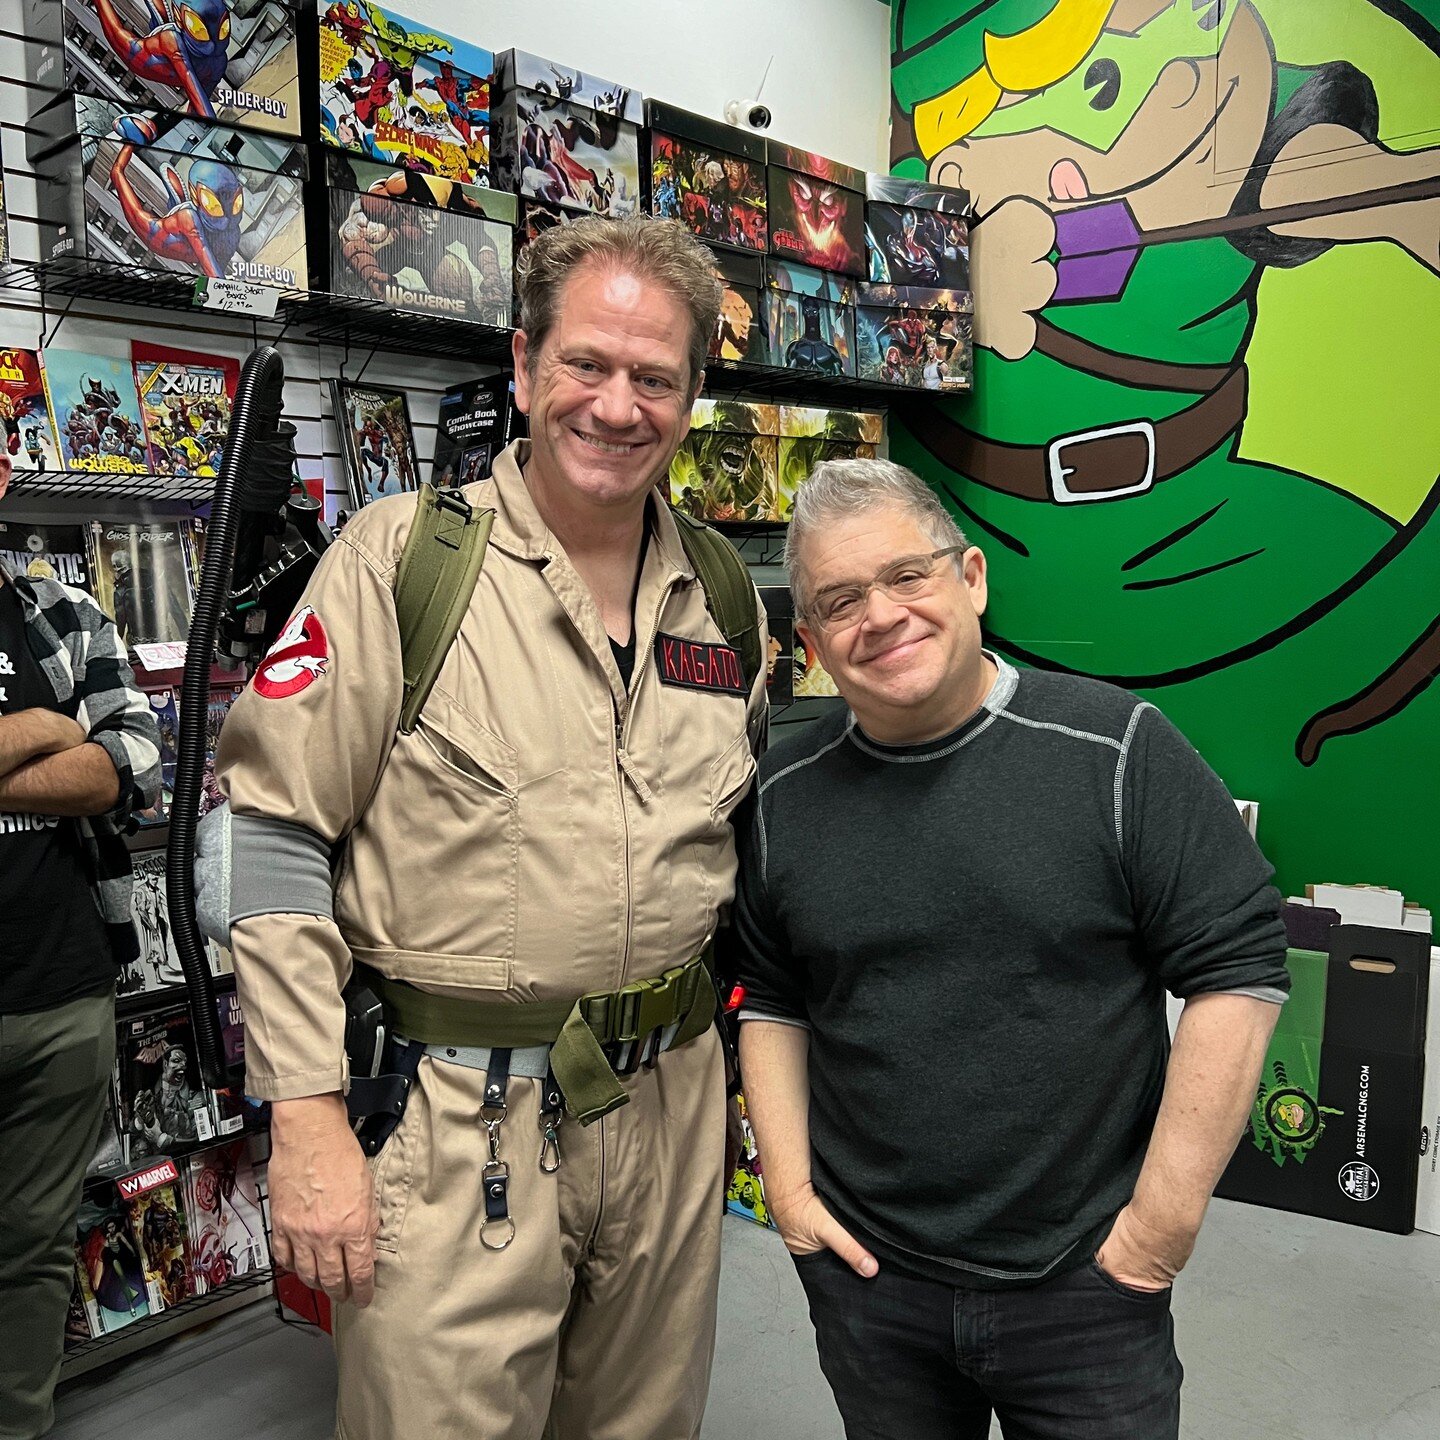 I had the opportunity to consult with Fokelore expert, Dr. Hubert Wartzki on a recent case. :)

Heh, I got to meet @pattonoswalt at an event at my local comic book store, @arsenalcomicsandgames. He was extremely nice we talked a moment about my proto